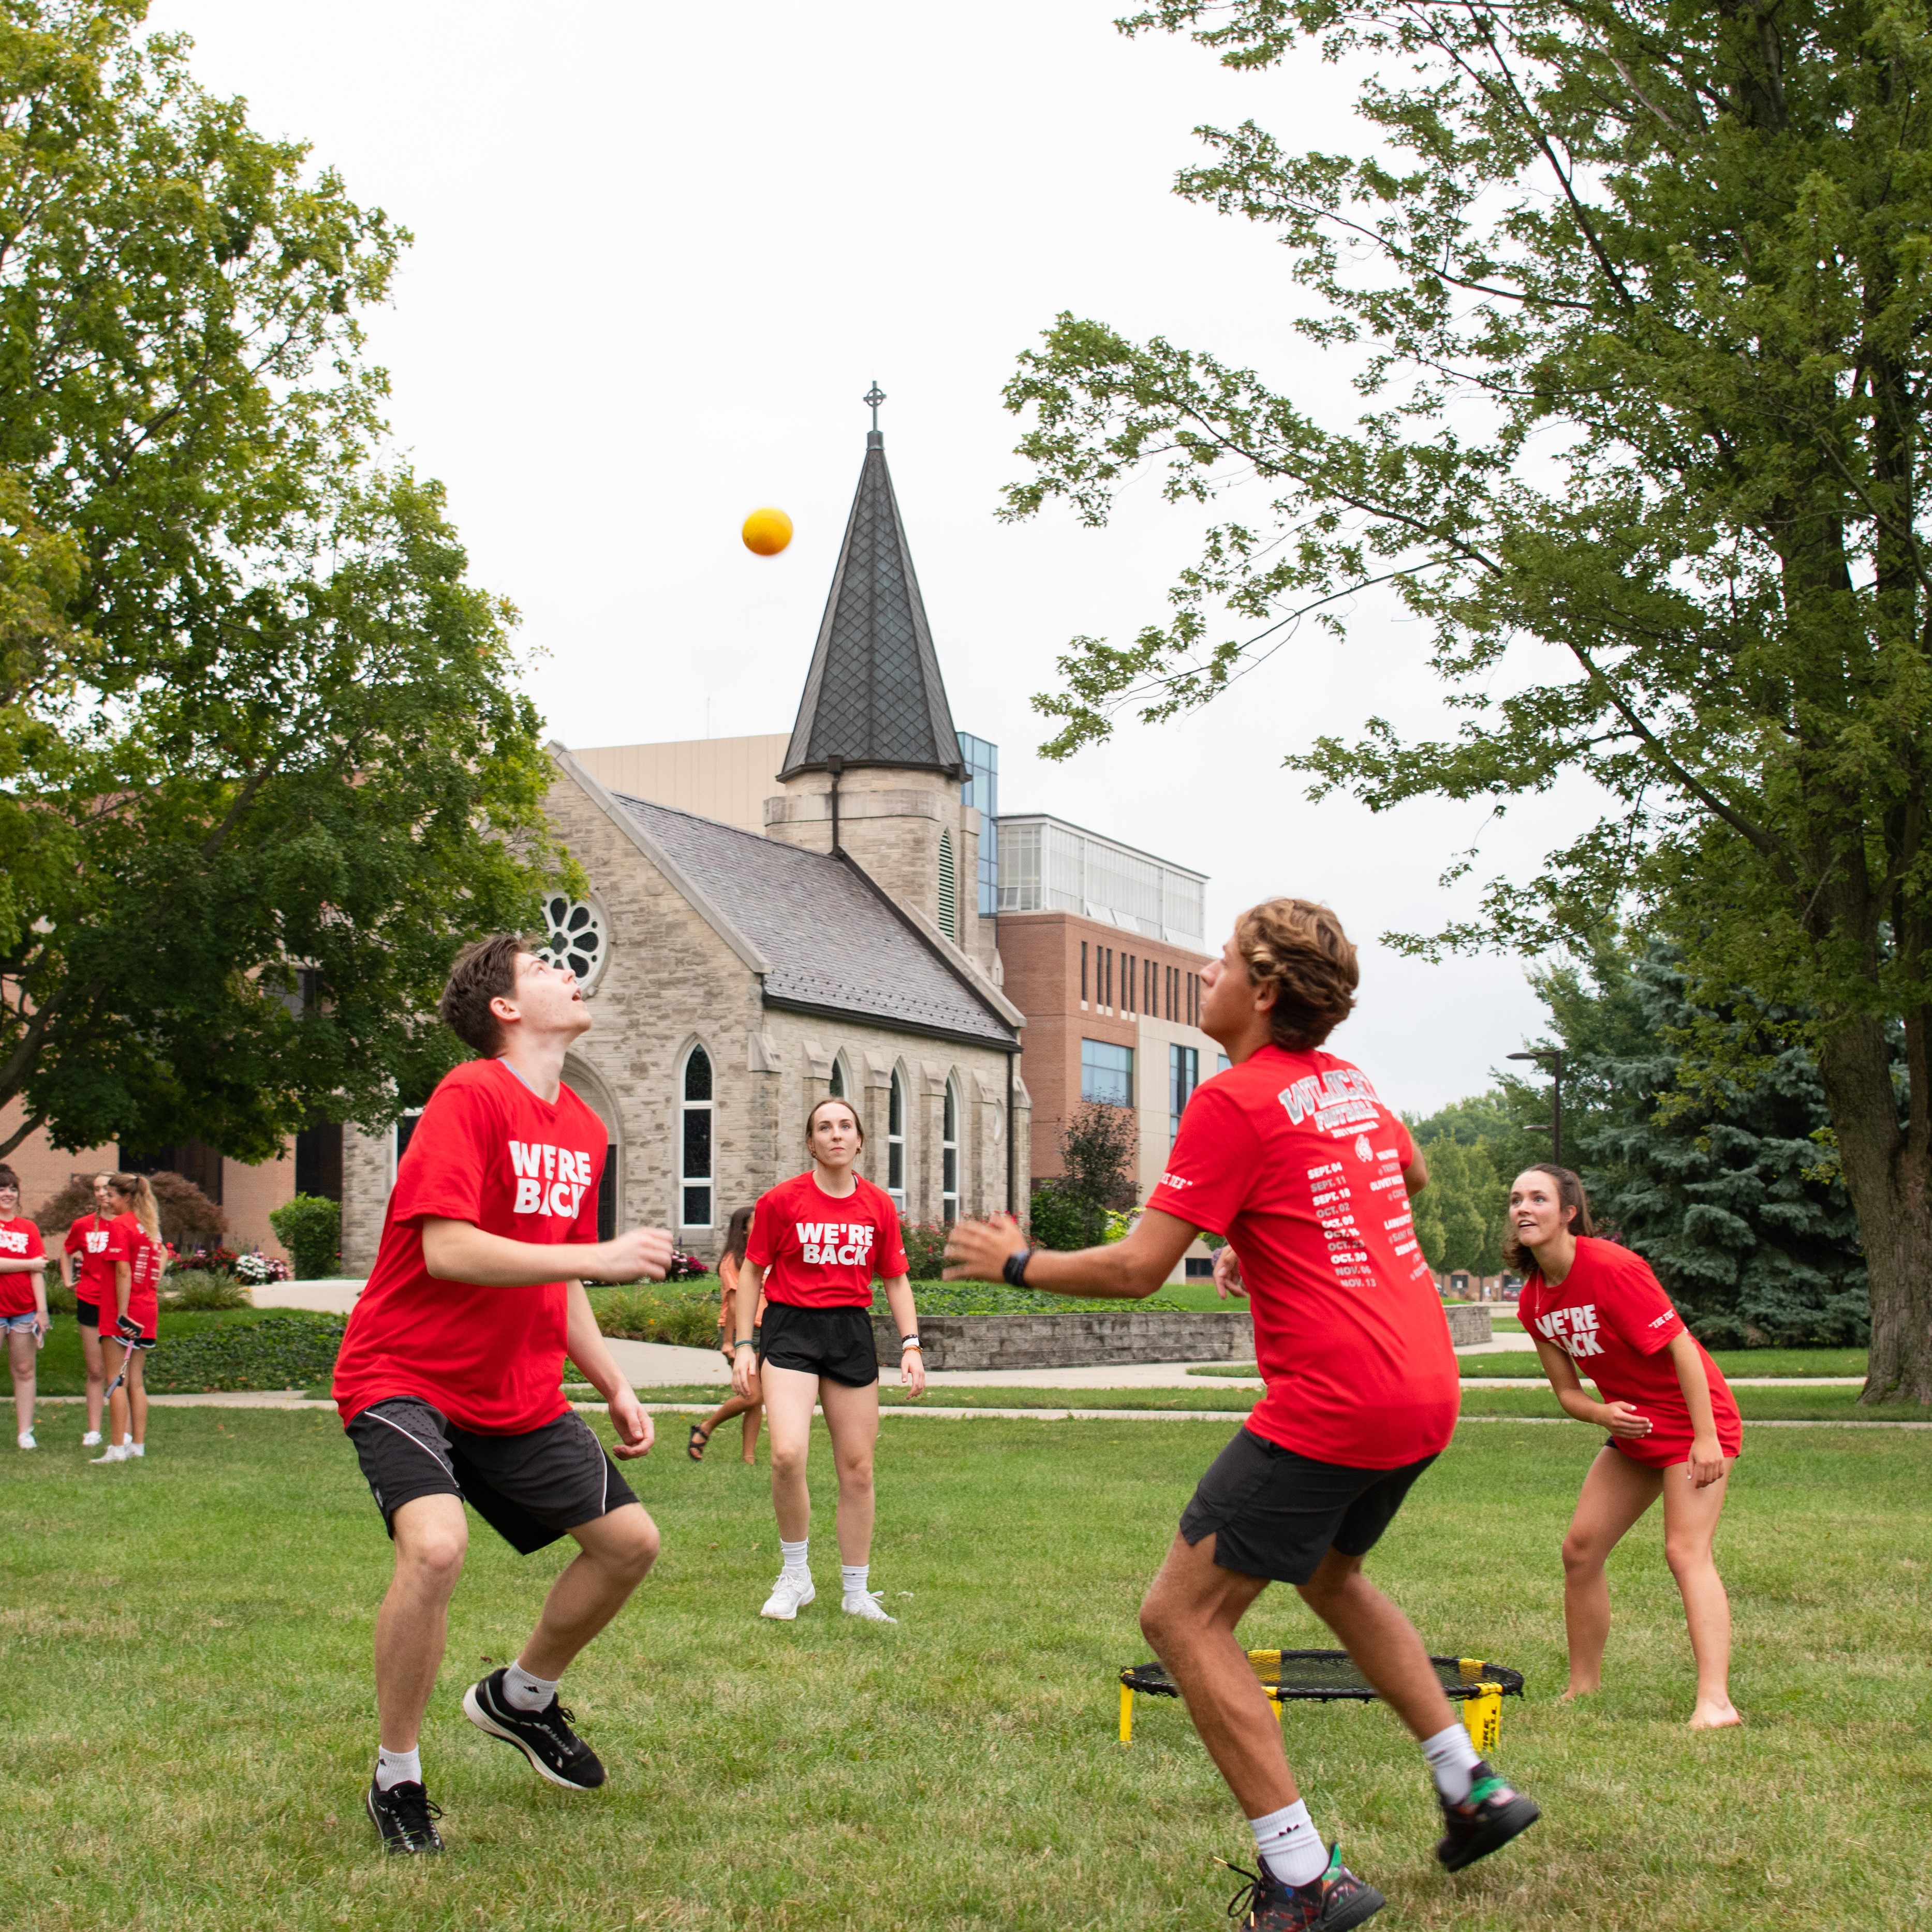 A group of students play a ball game on campus